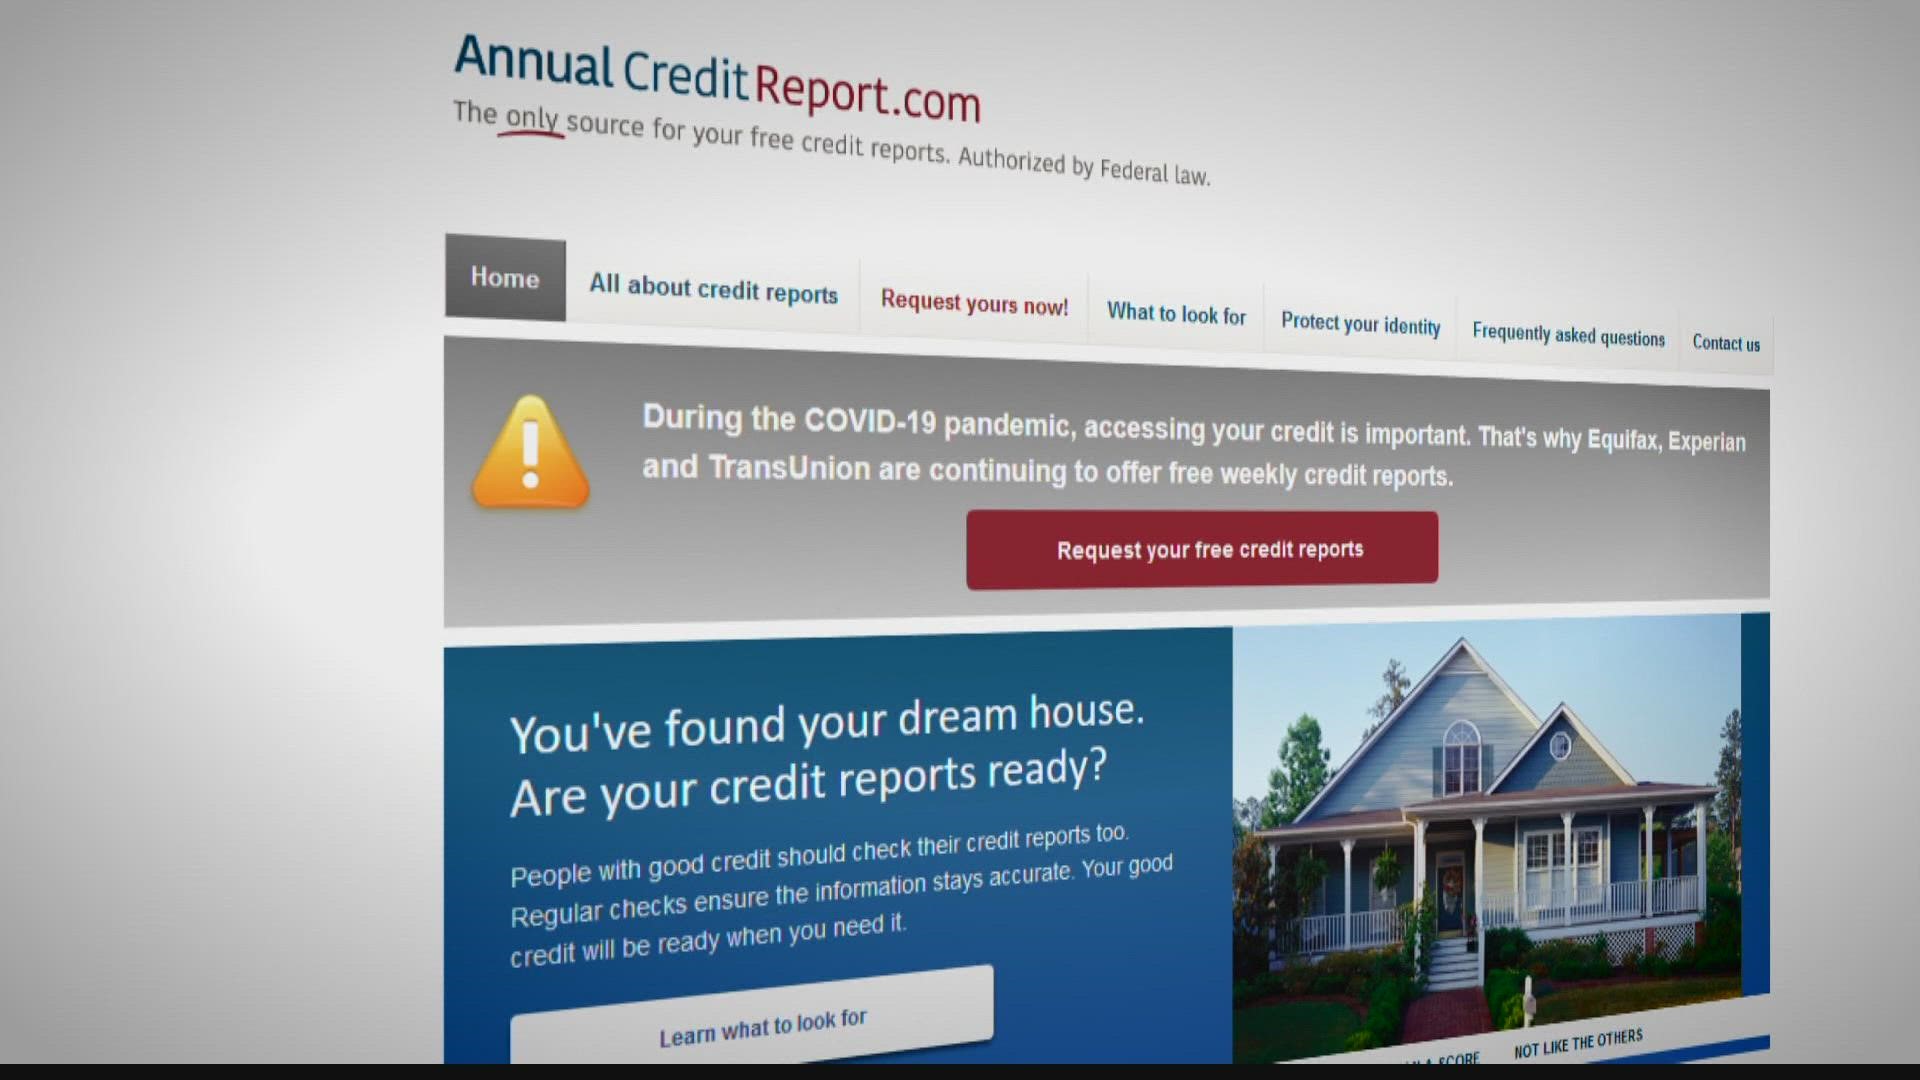 Allison Gormly tells us what's the deal with free credit reports.